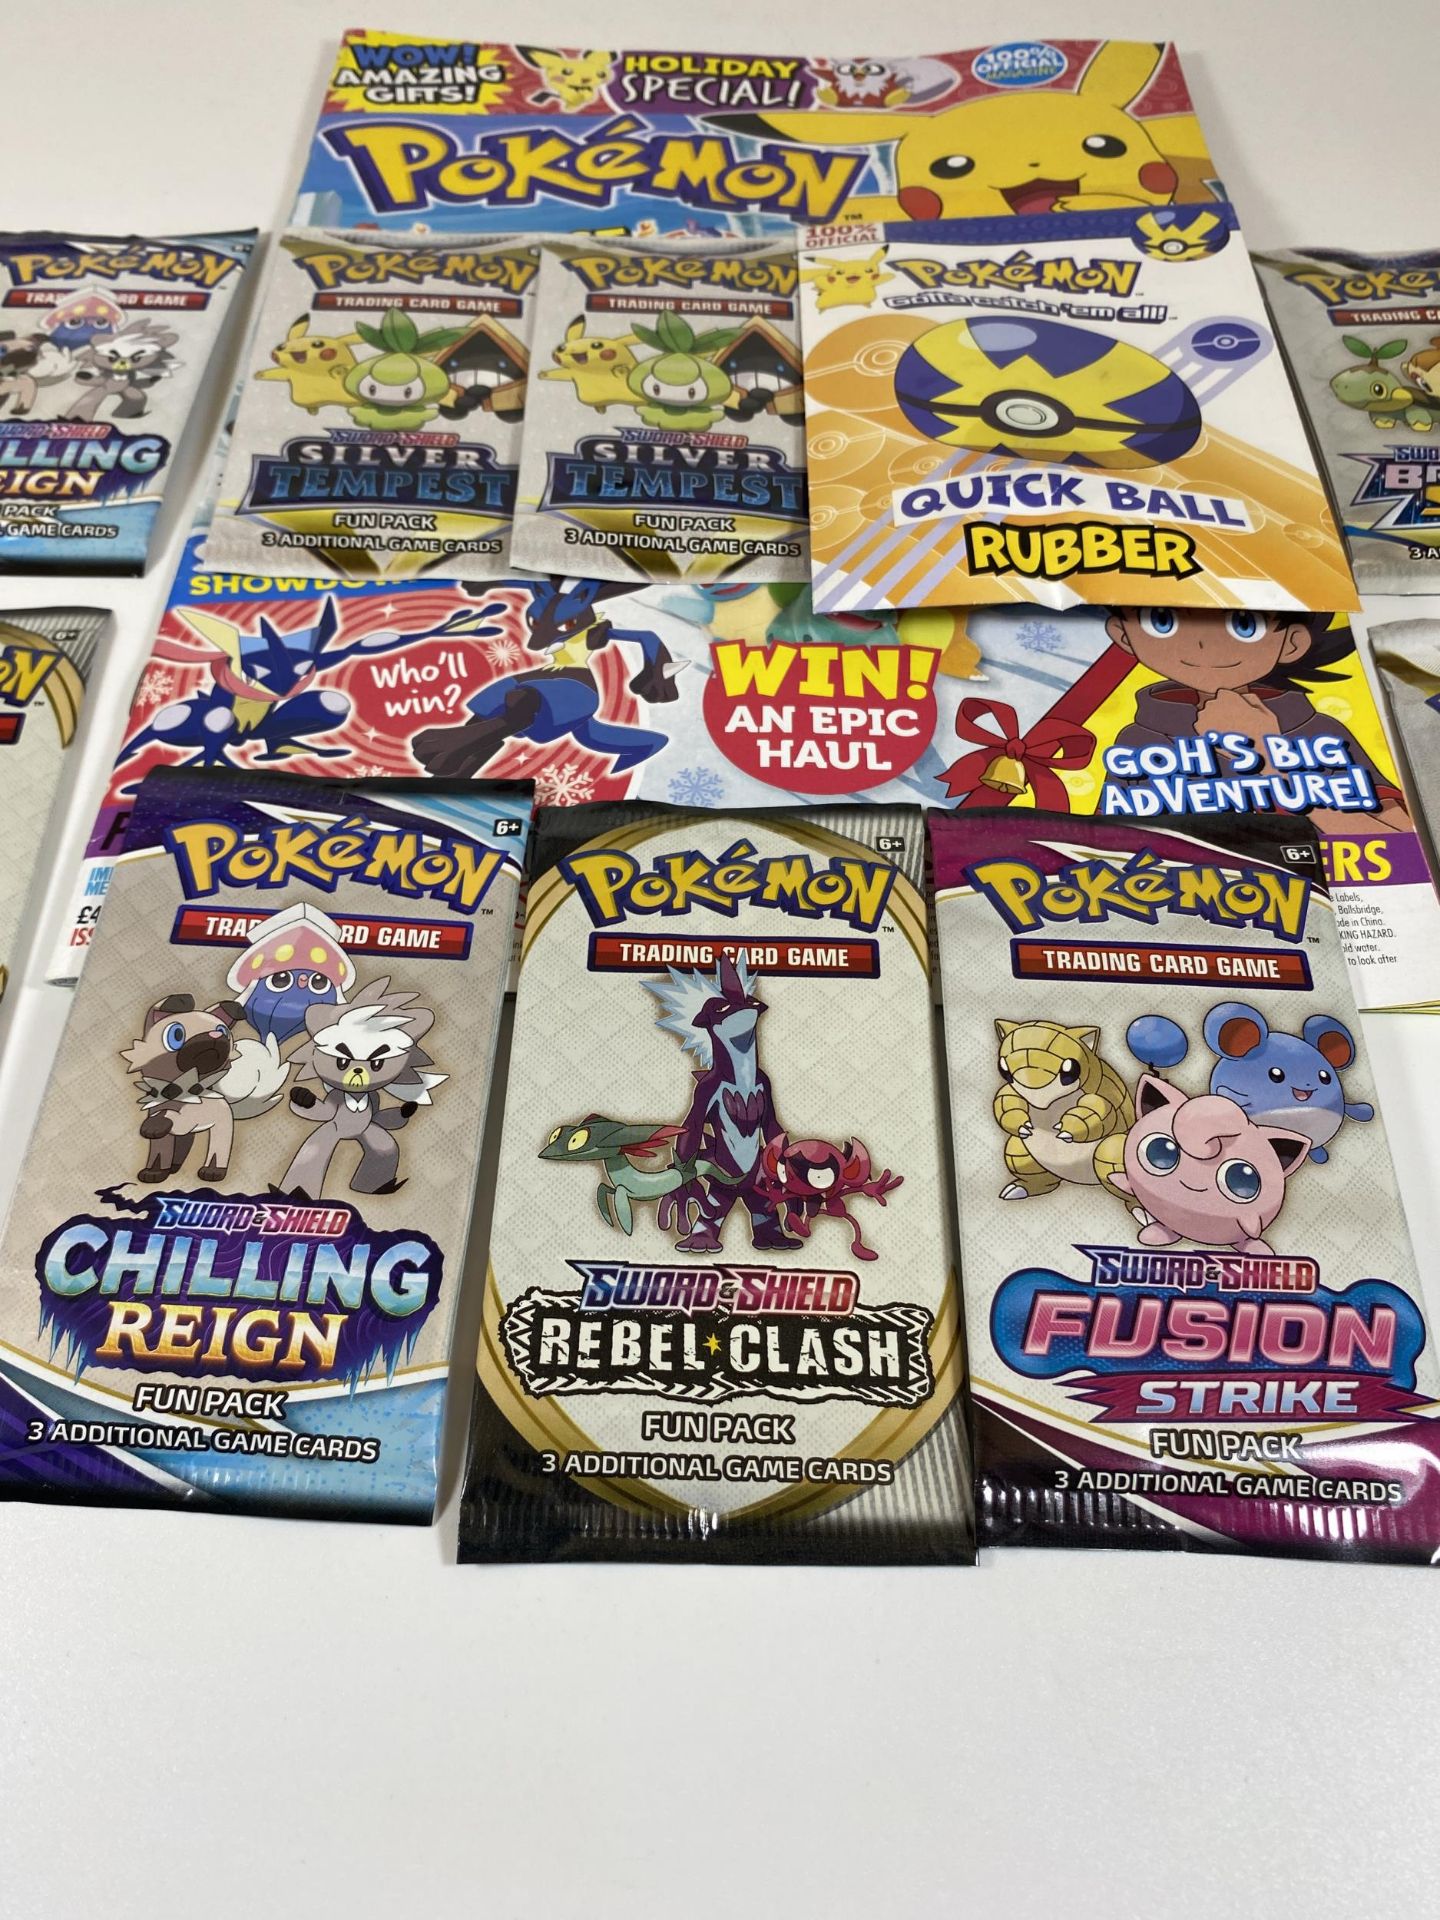 A COLLECTION OF POKEMON SWORD & SHIELD PACKS, MAGAZINE WITH PACKS ETC - Image 4 of 4